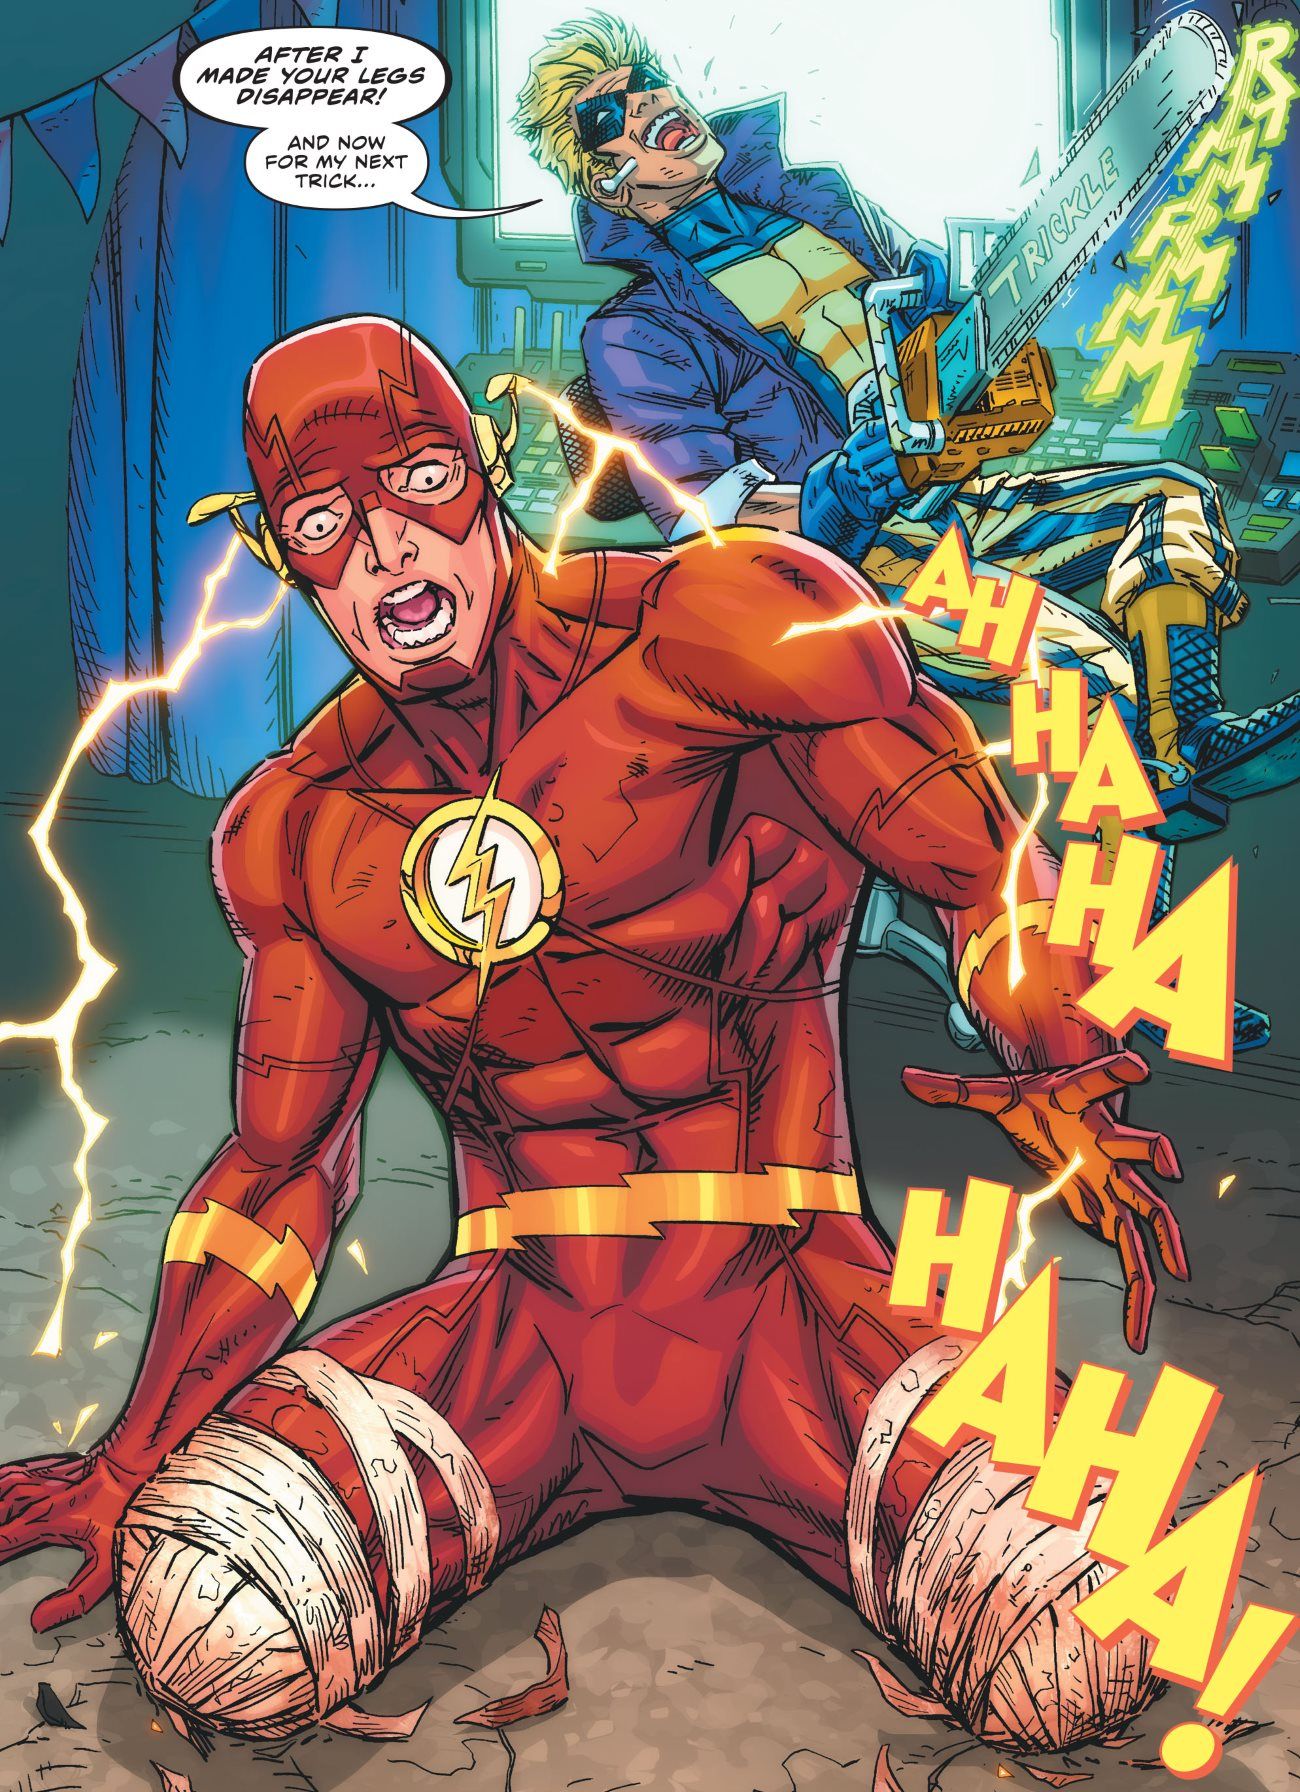 The Flash With Legs Cut Off in Comic